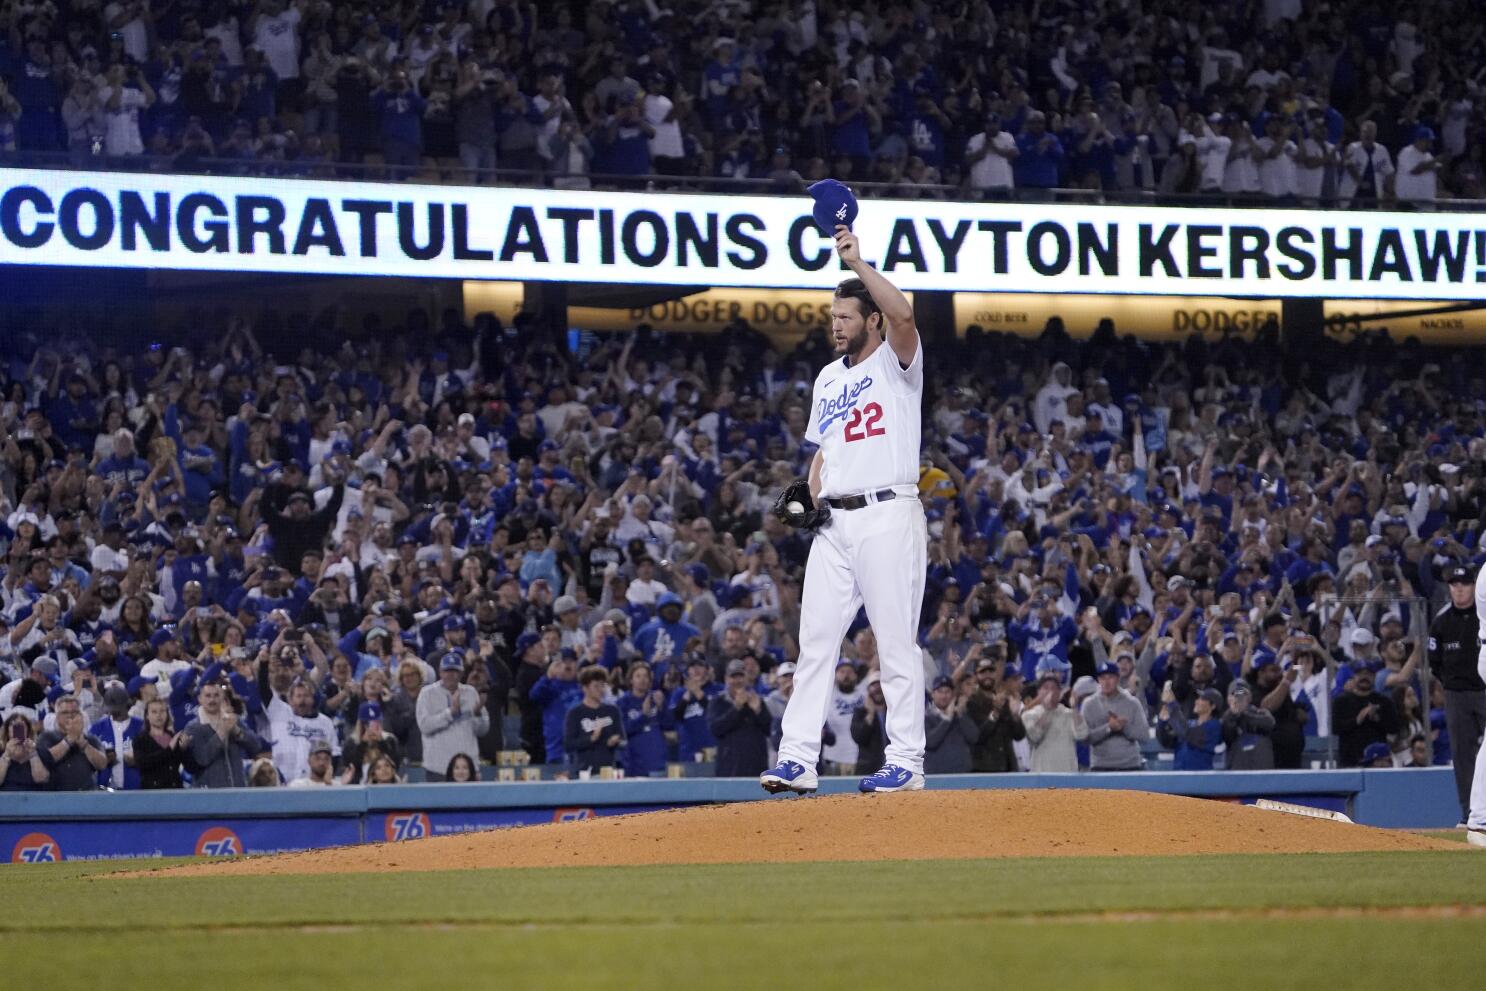 Tigers snap skid, spoil milestone night for Dodgers' Kershaw - The